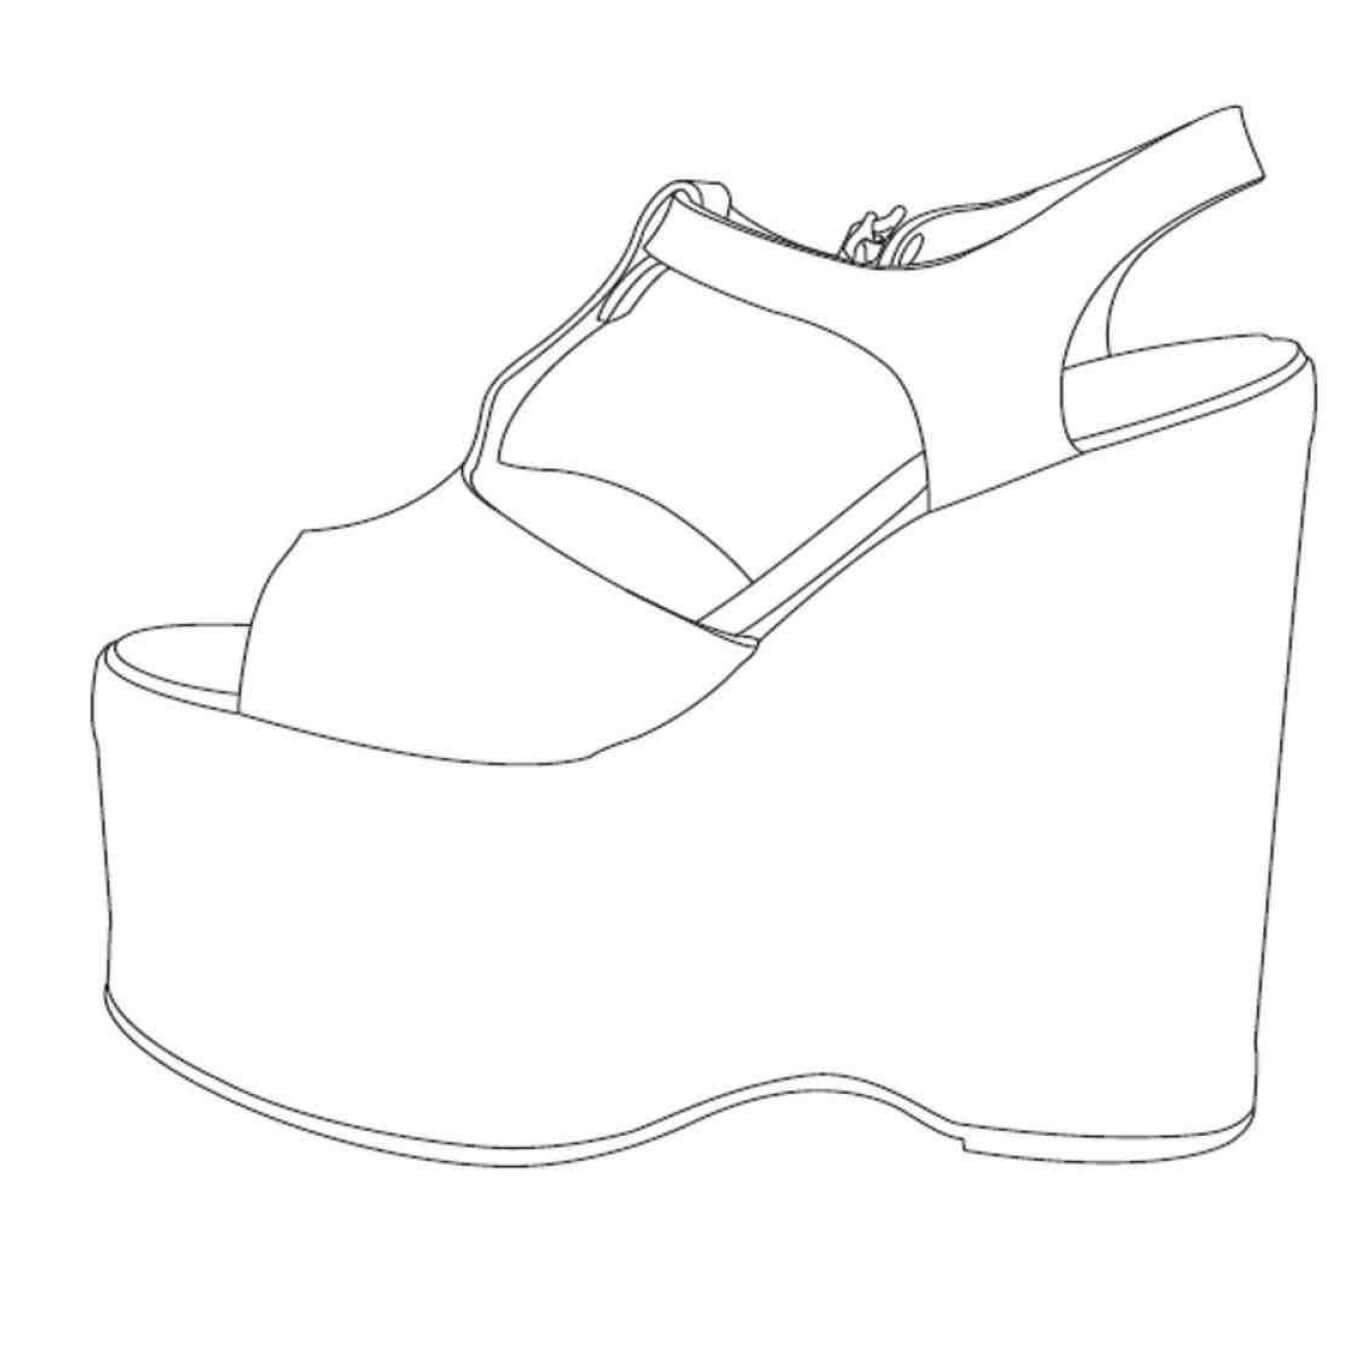 High Heel Drawing Template At Paintingvalley | Explore within High Heel ...